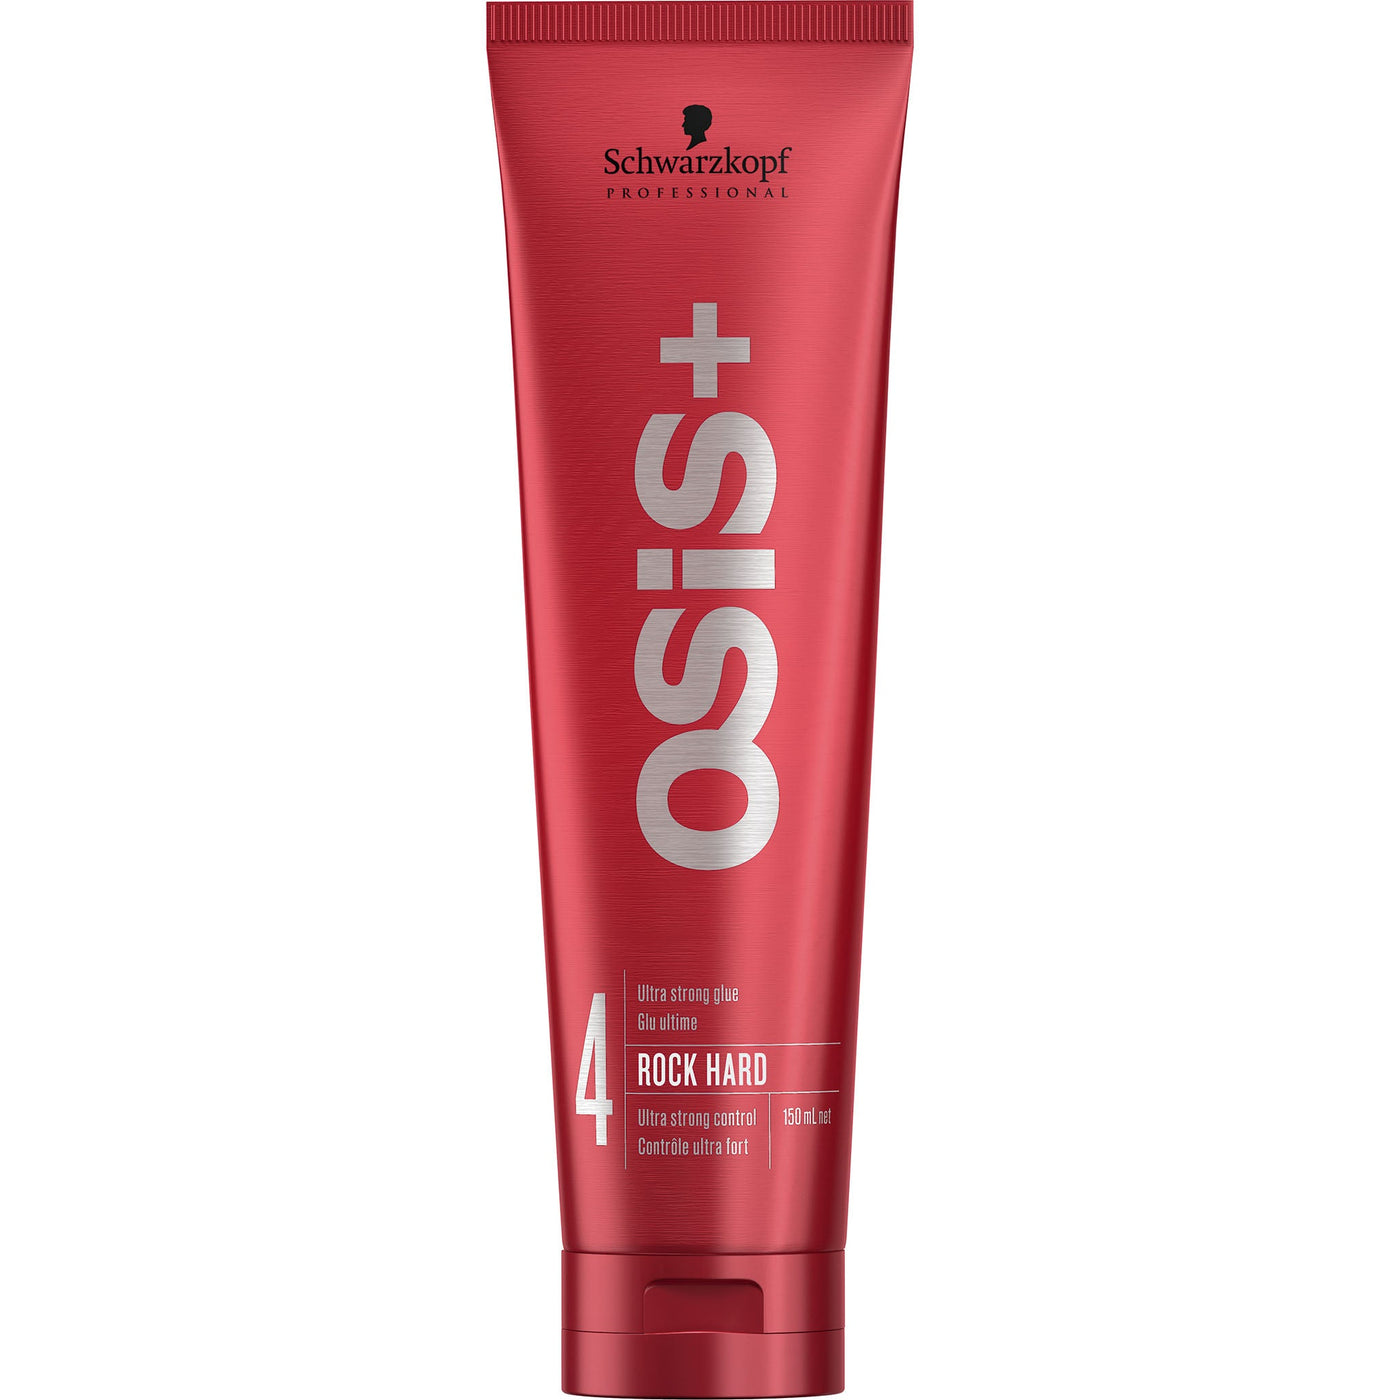 Schwarzkopf Professional OSiS+ Rock Hard - Ultra Strong Glue For Drastic Styles  (150ml)